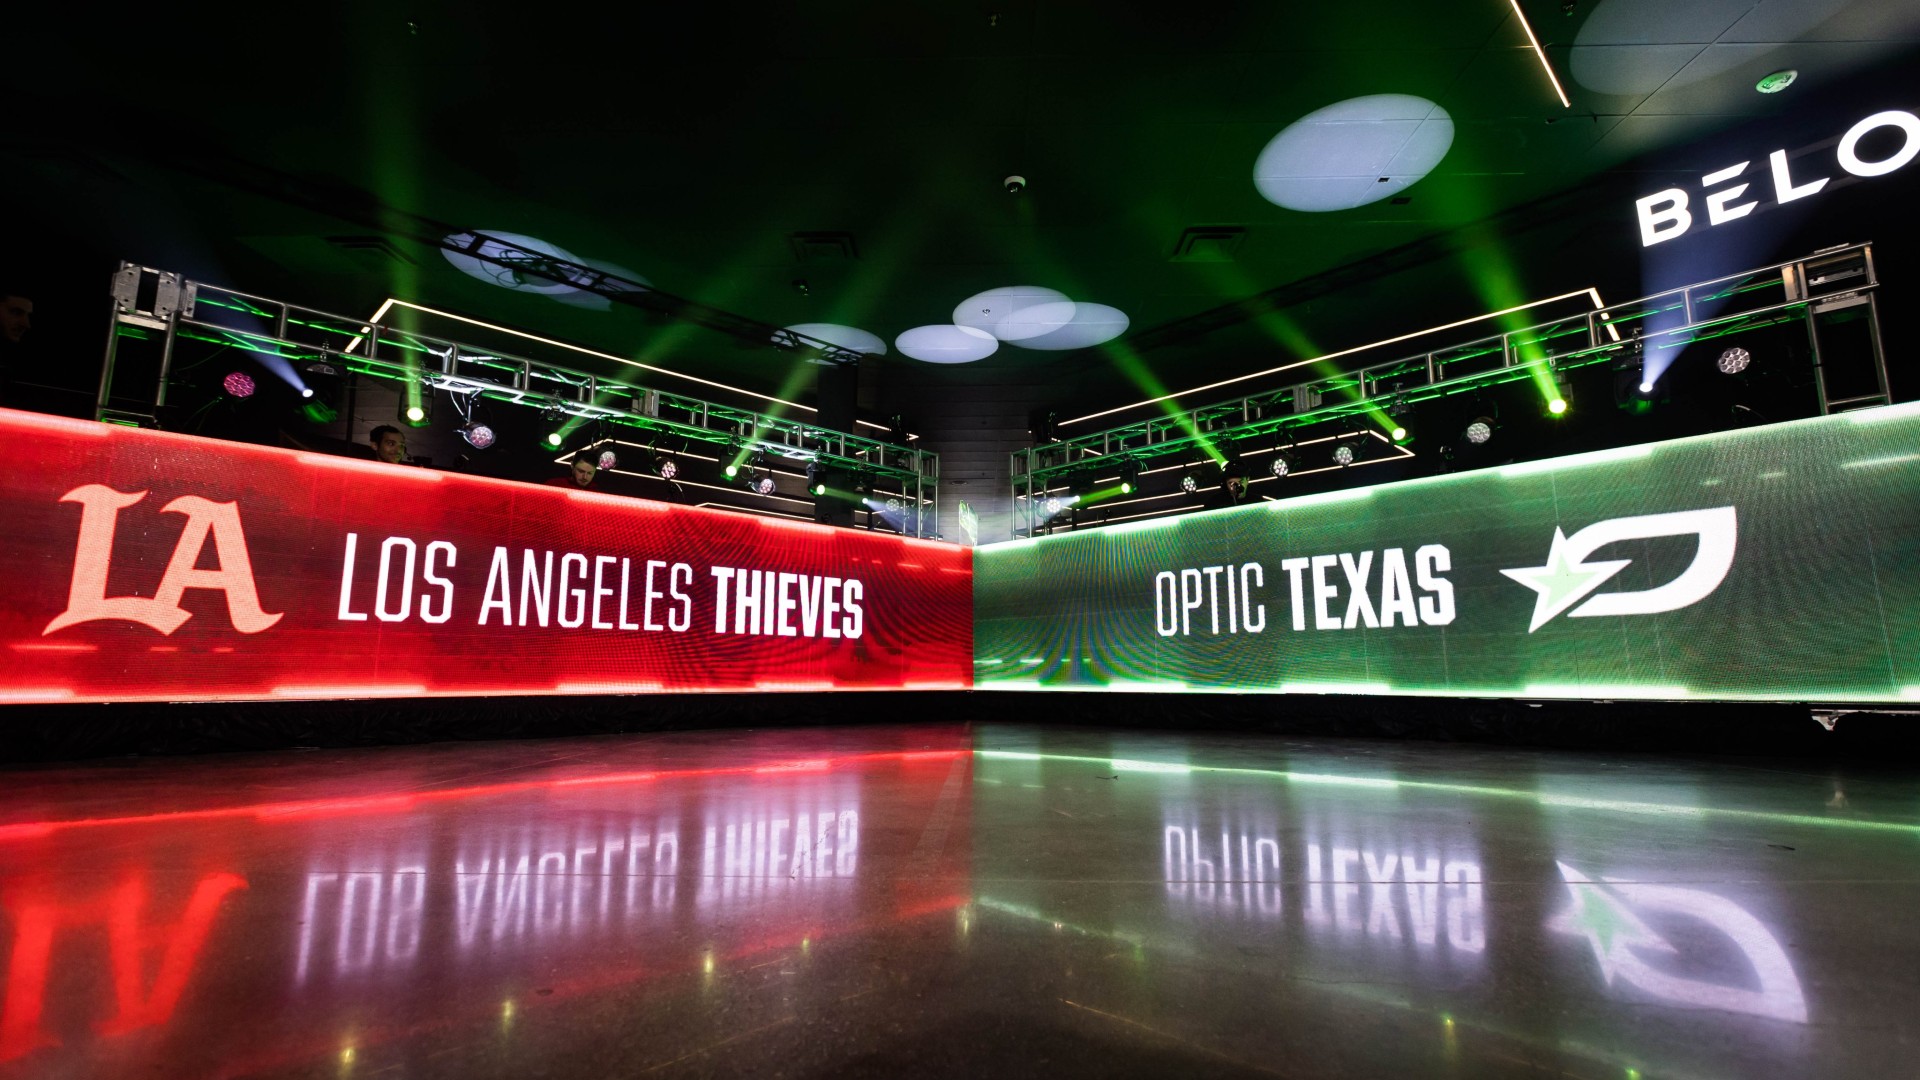 OpTic Texas hosts the third CDL Major of the season this weekend